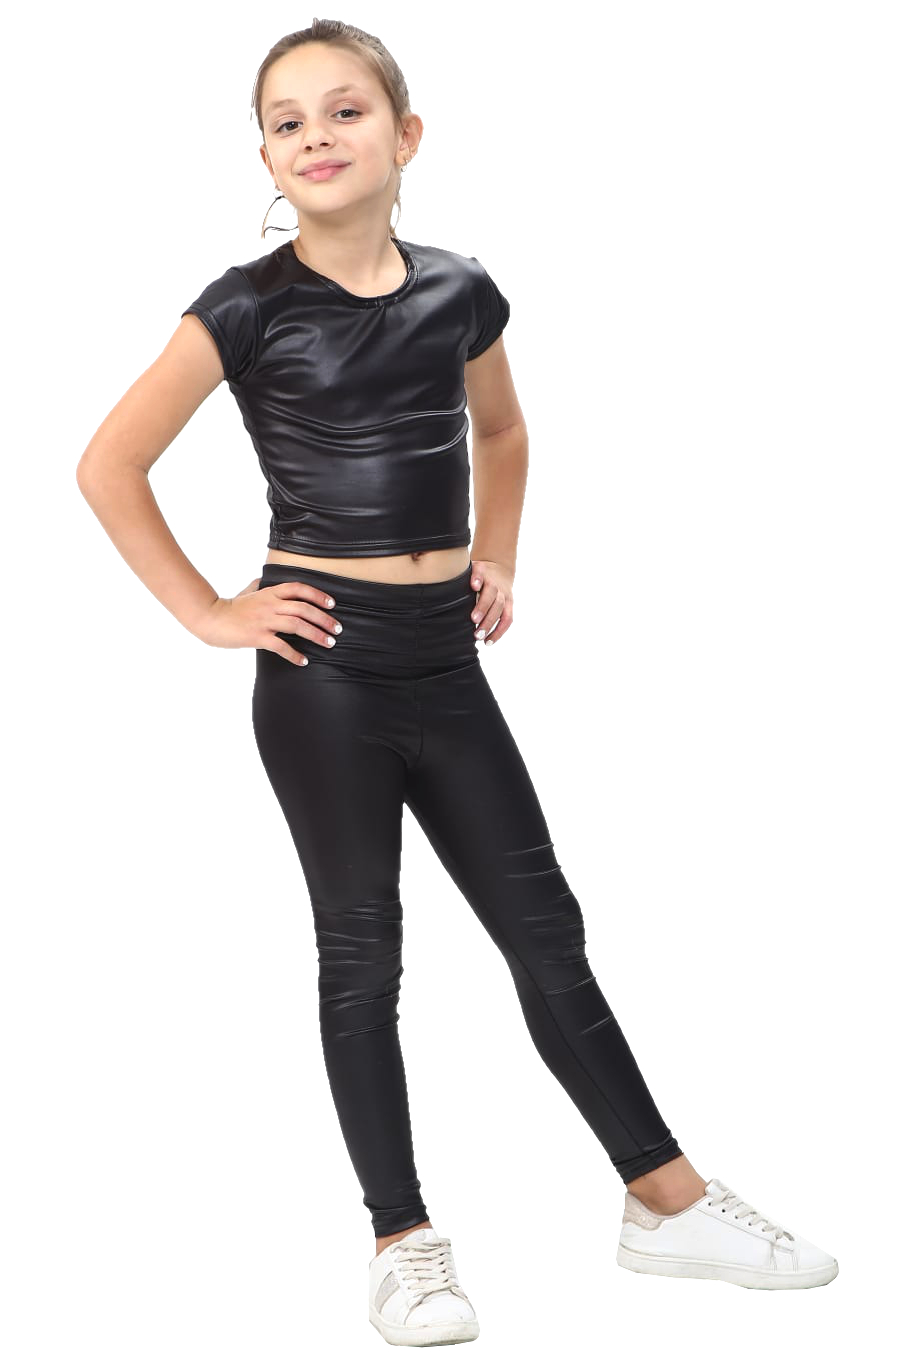 Girls Wet Look Outfit Crop Top And Leggings New Metallic Black Shiny